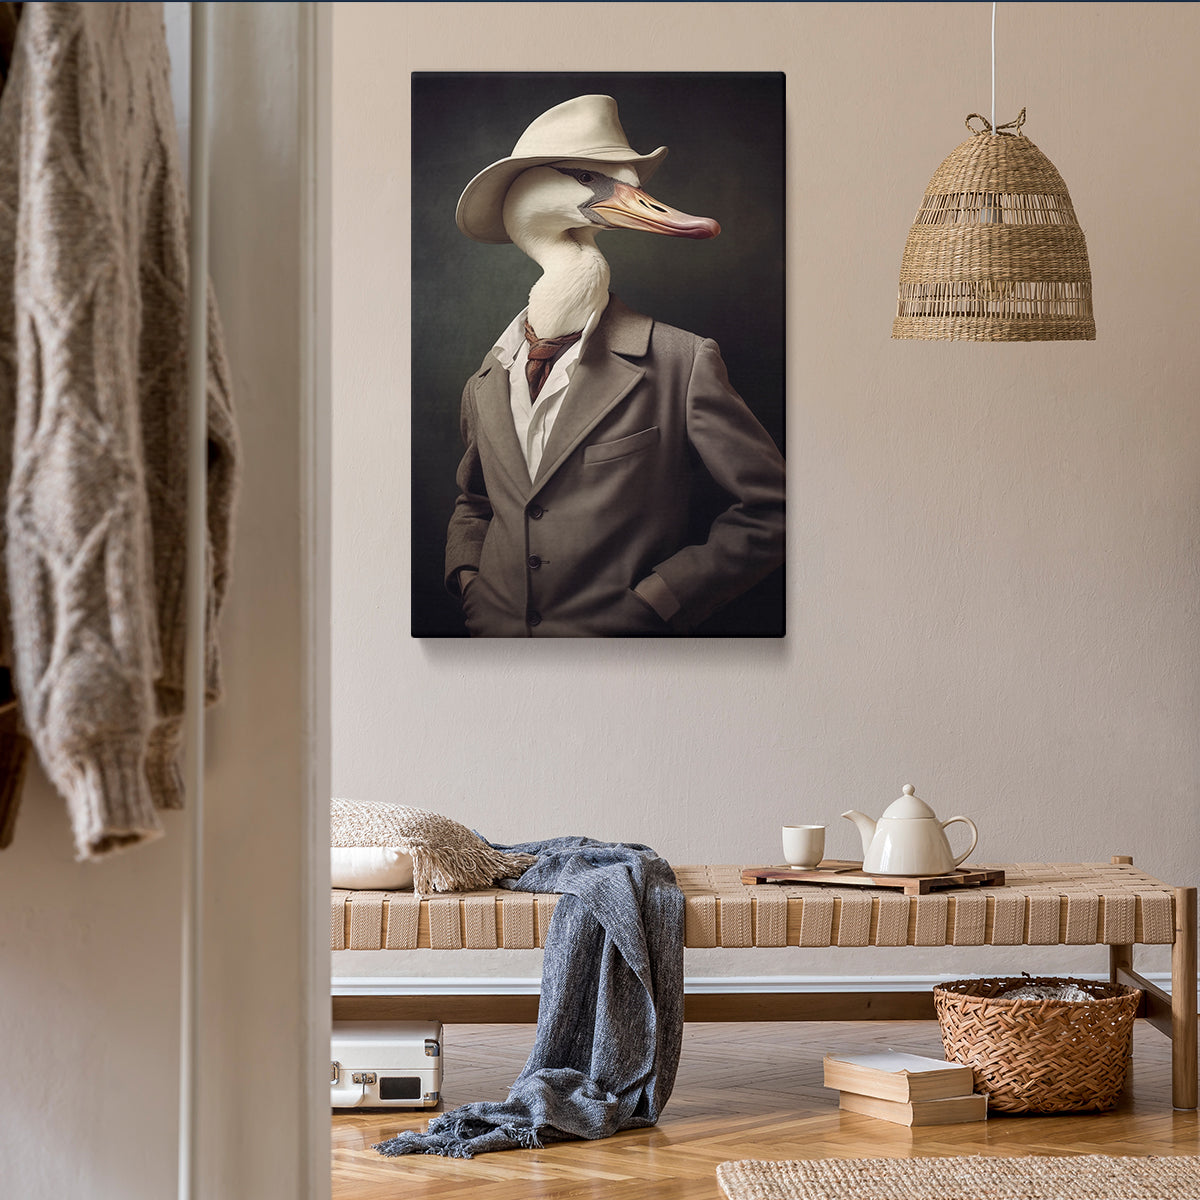 Sophisticated Swan in Hat and Suit Canvas Print ArtLexy 1 Panel 16"x24" inches 